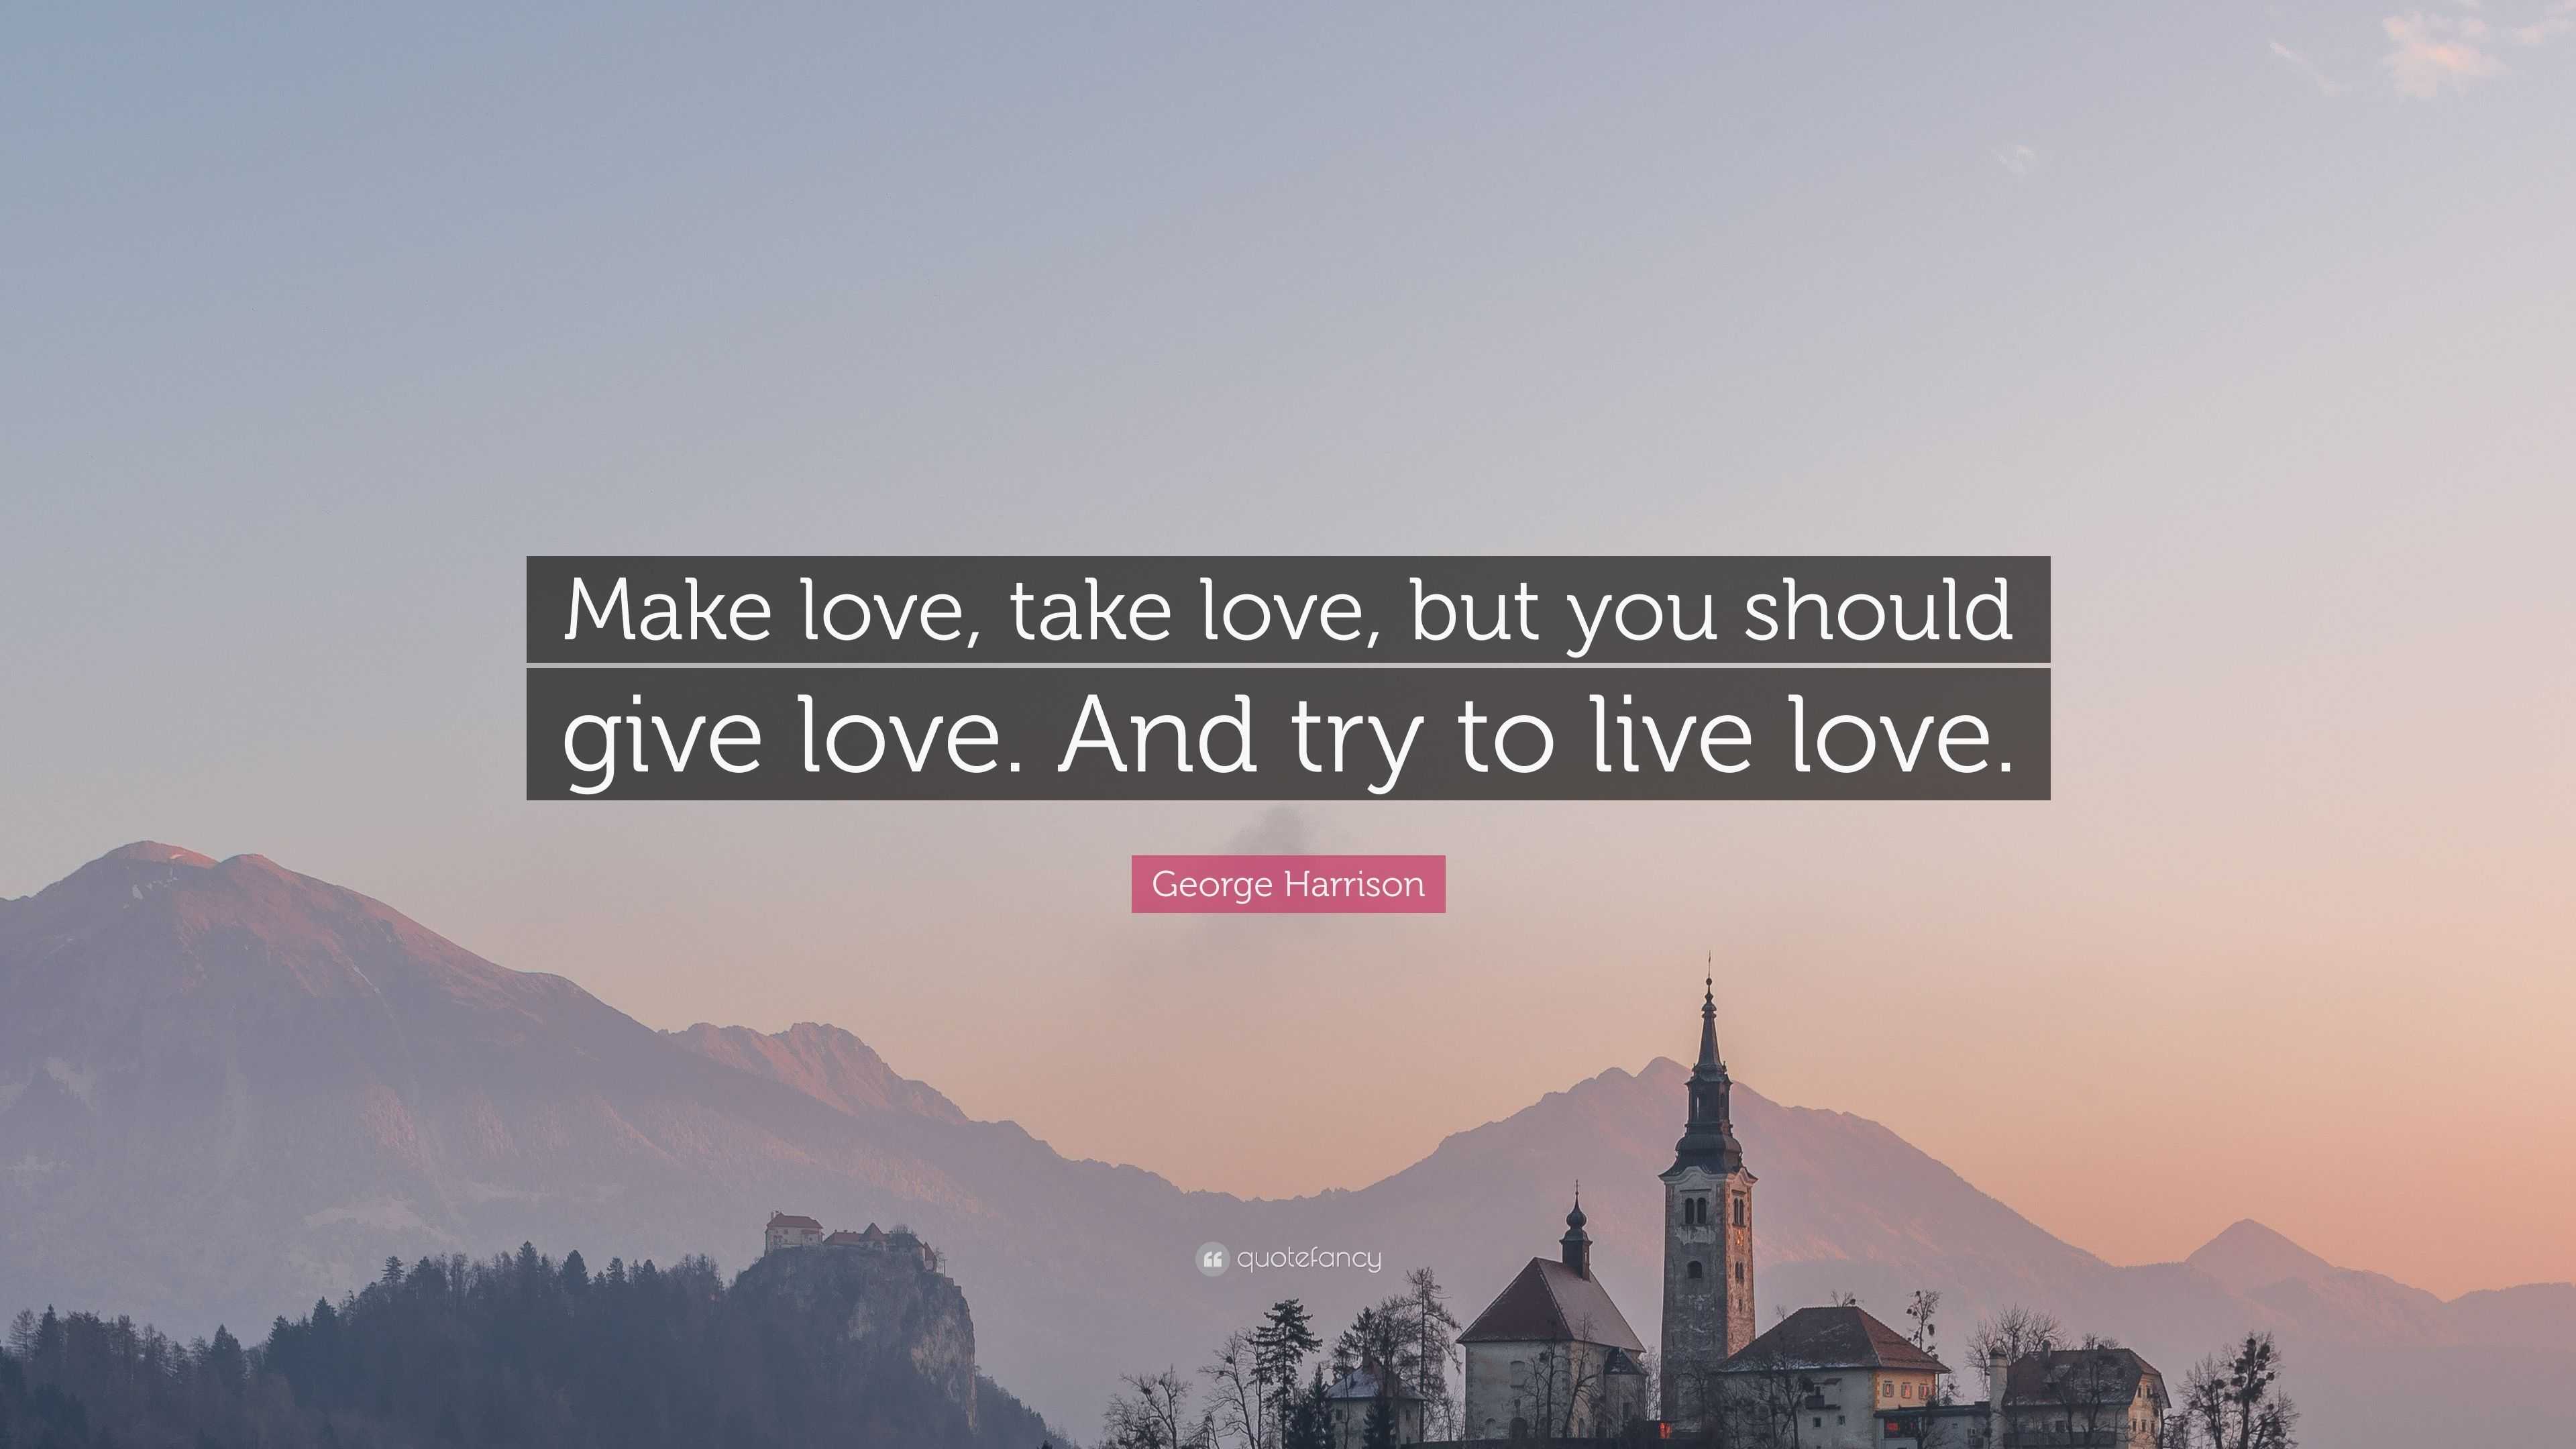 George Harrison Quote: “Make love, take love, but you should give love. And  try to live